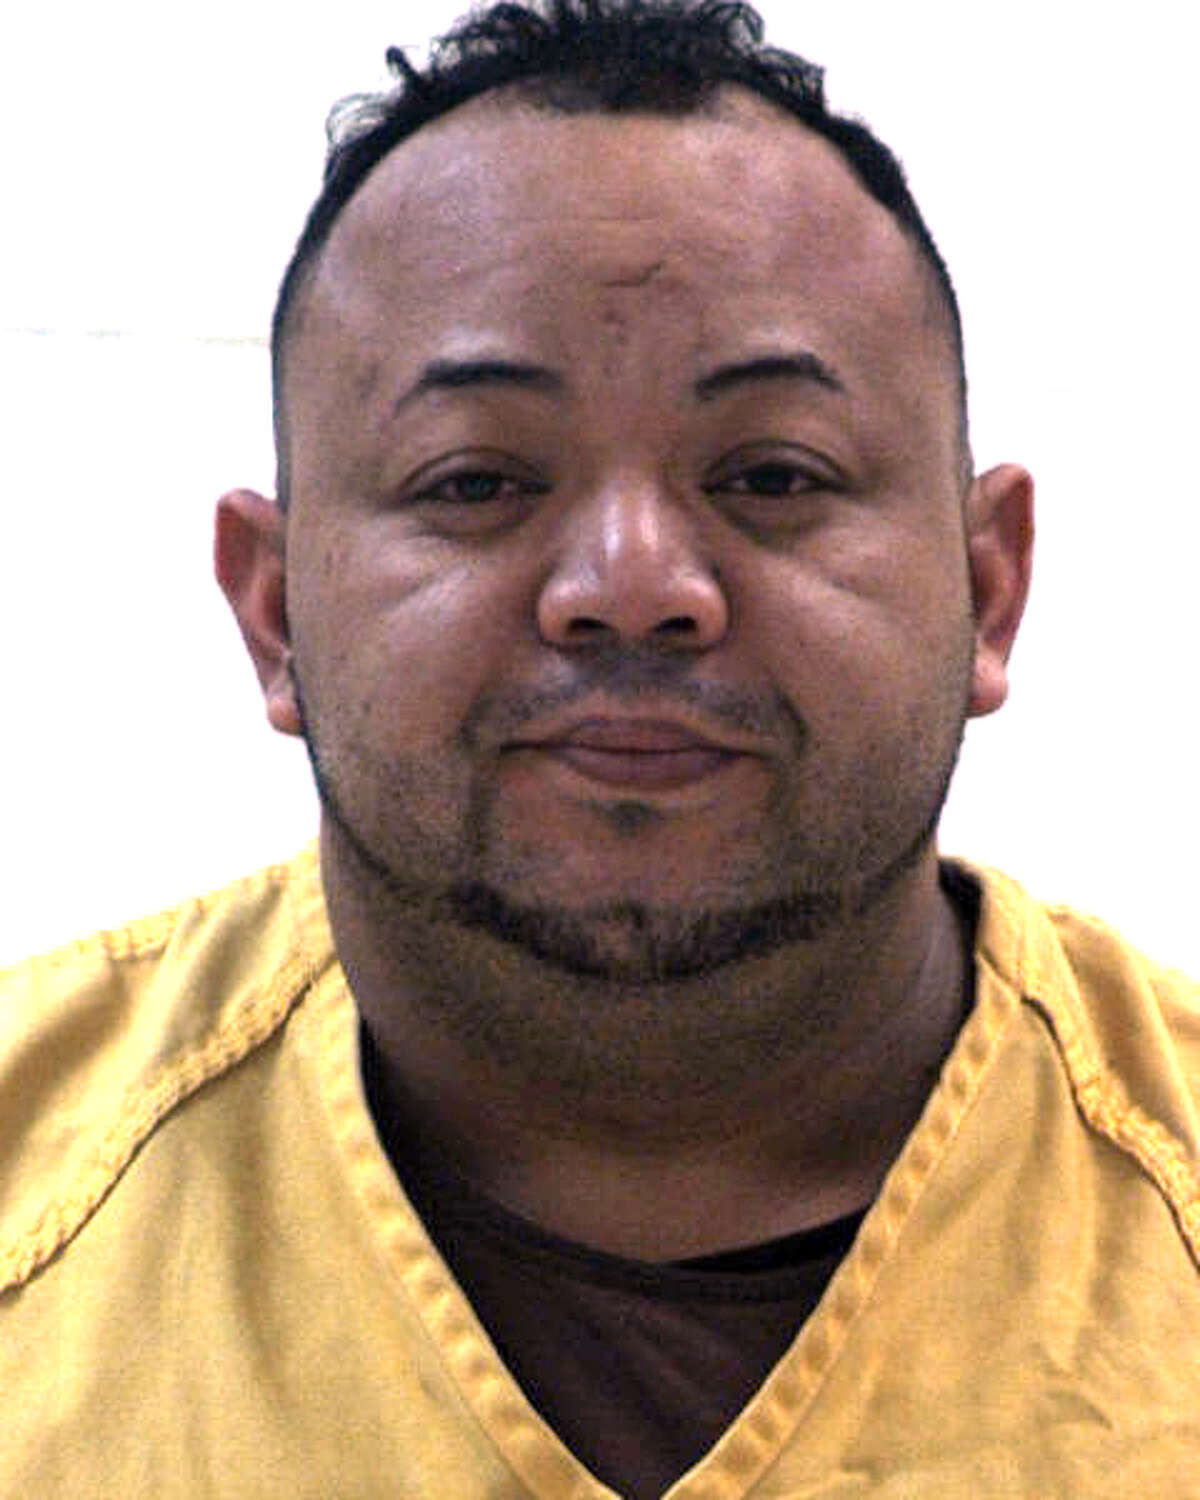 The booking photo of Oscar Hernandez, 39, of Bridgeport, Conn. He was arraigned in Centre Hall Courthouse, Centre County, Pa. on Friday, February 24, 2017.